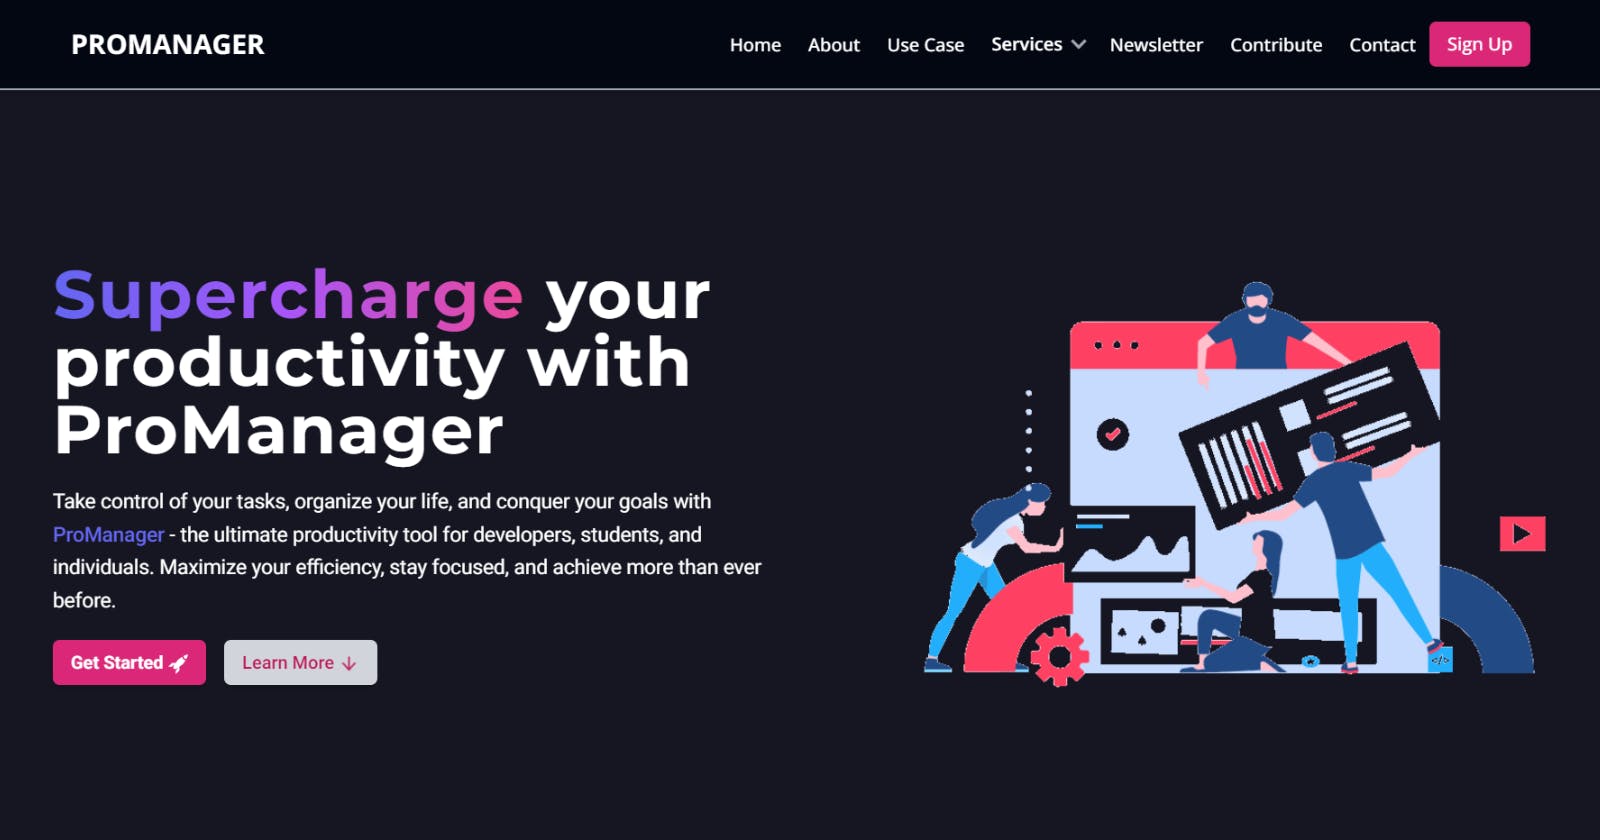 ProManager - The Only Productivity Tool You Need